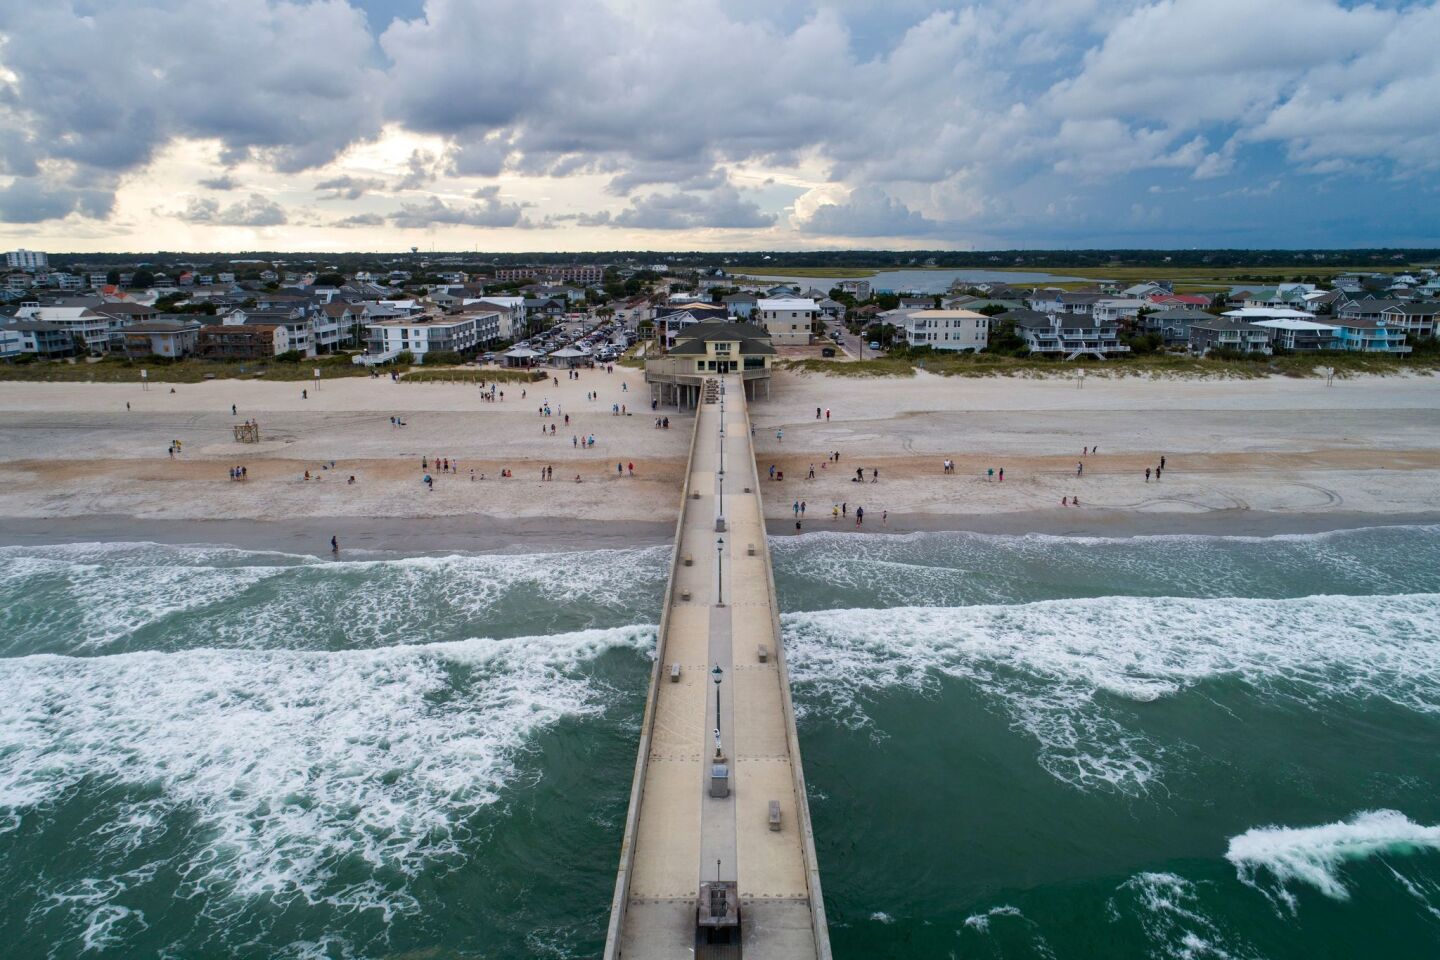 Johnny Mercer's Fishing Pier juts into the Atlantic Ocean two days before Hurricane Florence is expected to strike Wrightsville Beach, N.C.